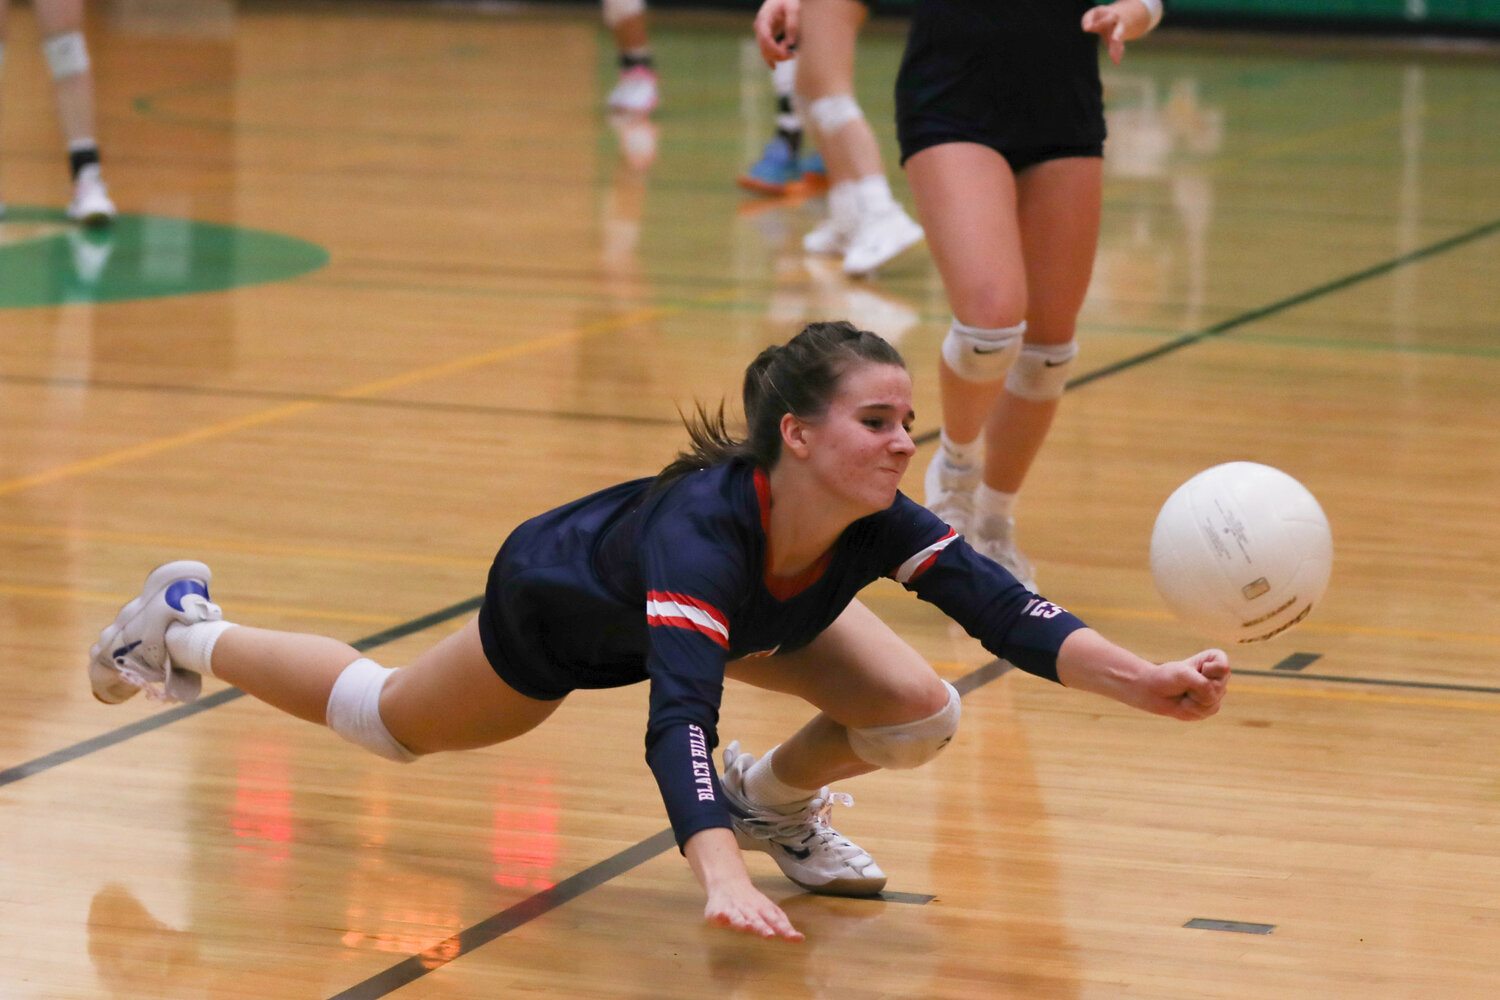 Lilly Kincaid dives to keep a ball in play during Black Hills' 3-2 win over R.A. Long in the first round of the 2A District 4 Tournament on Nov. 2 in Tumwater.